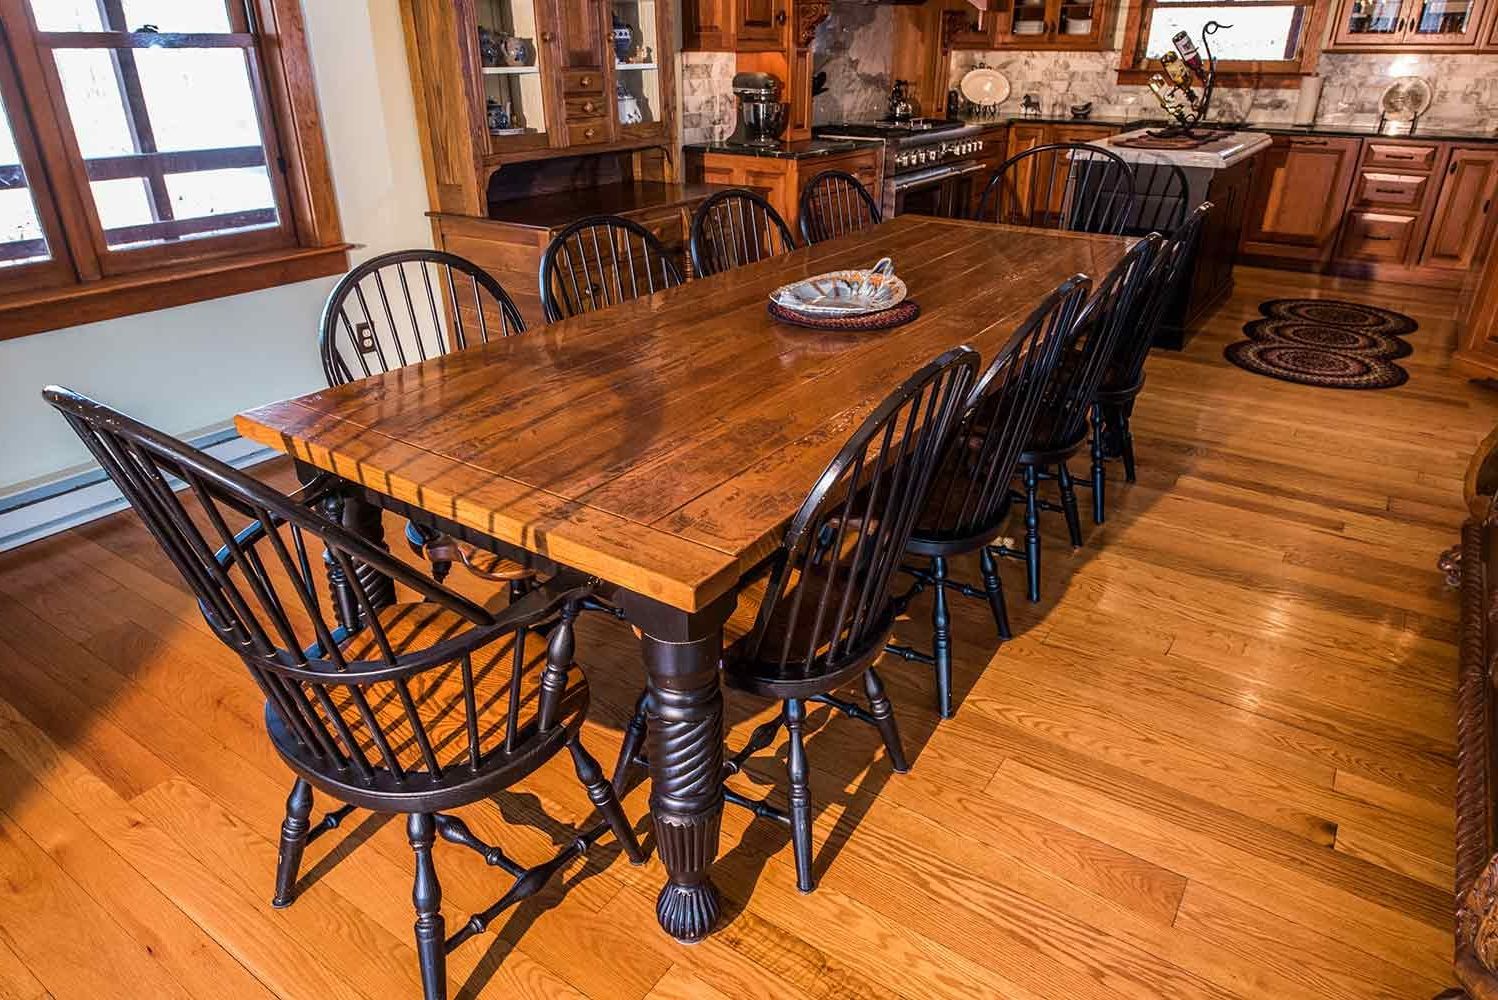 New England Quarter Sawn White Oak Farm Dining Table Inside Best And Newest Distressed Walnut And Black Finish Wood Modern Country Dining Tables (View 21 of 30)